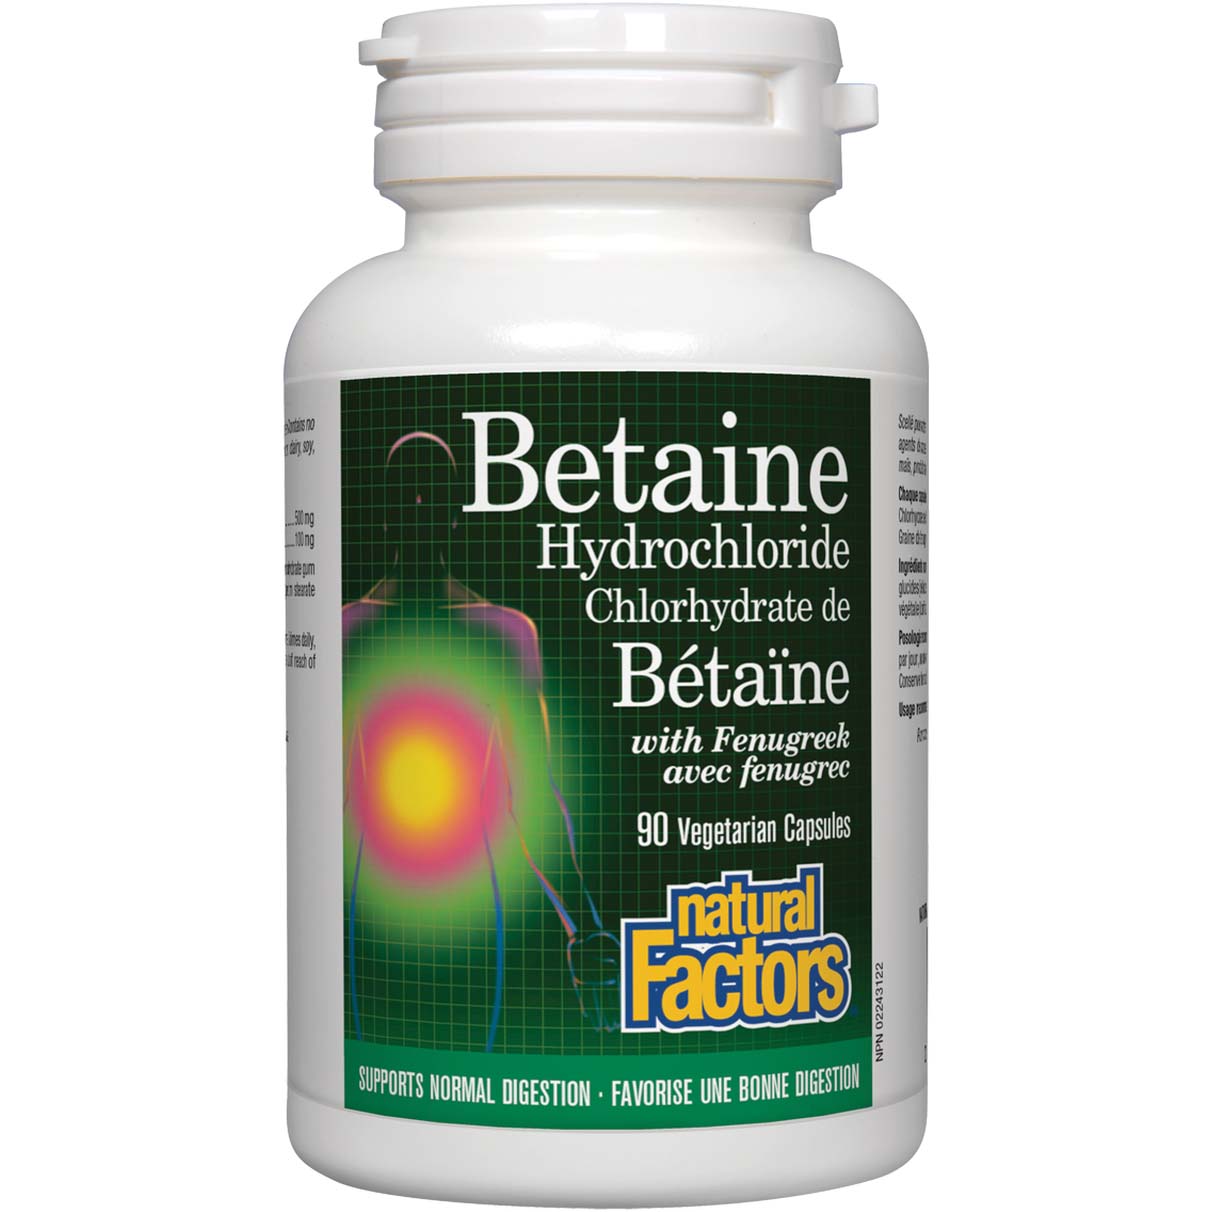 Natural Factors Betaine Hydrochloride With Fenugreek, 90 Veggie Capsules